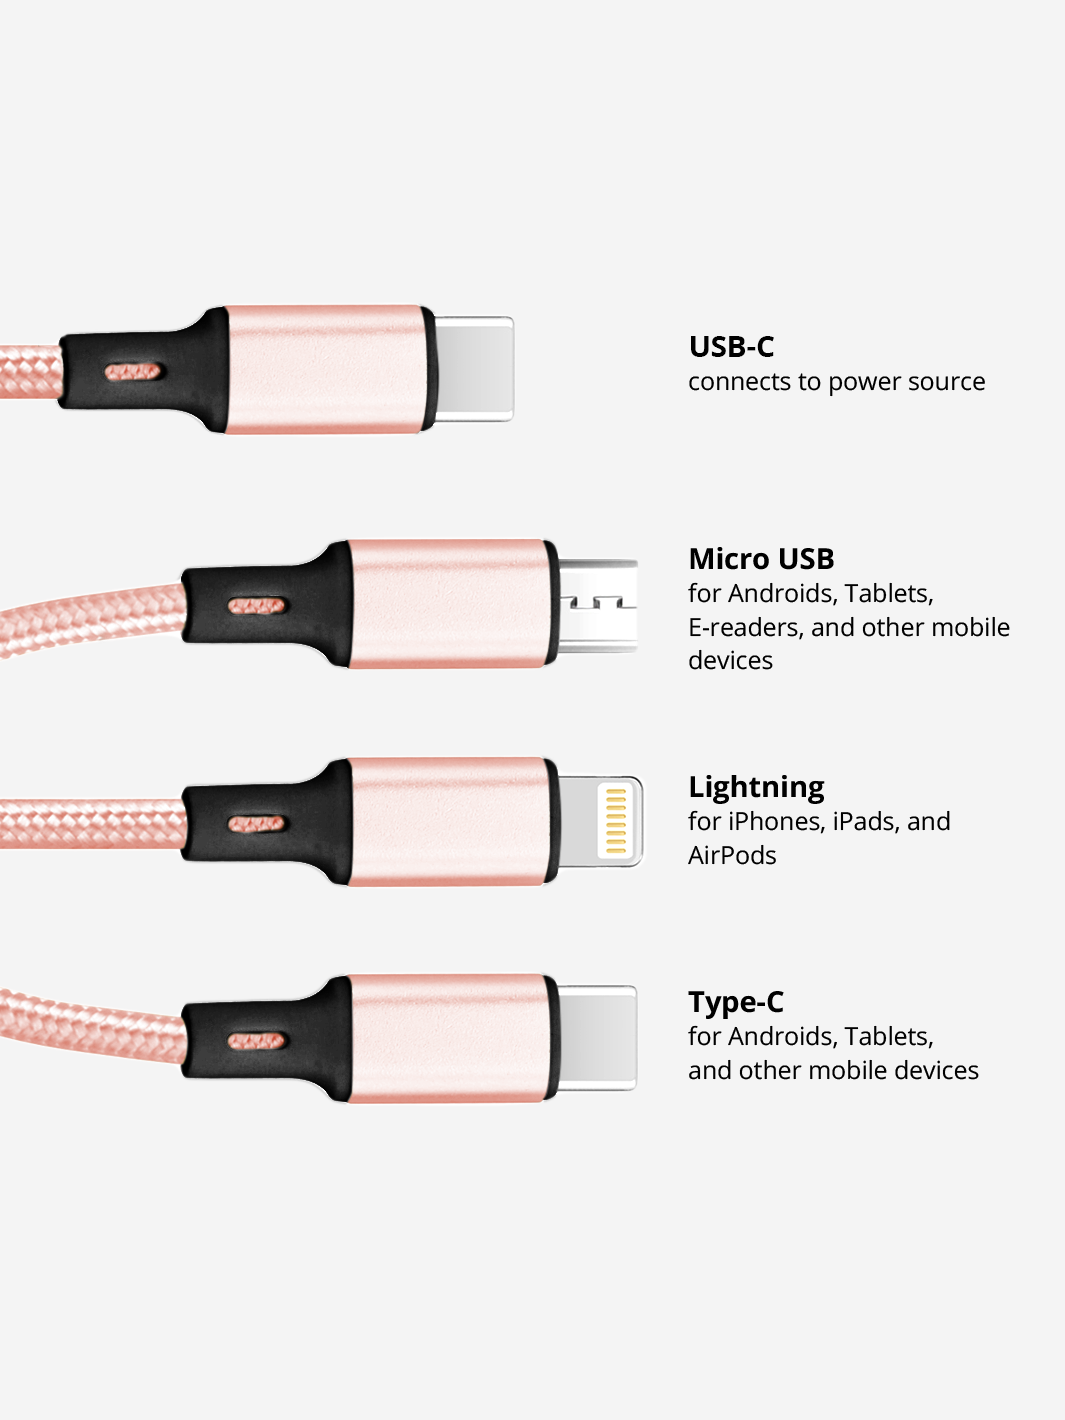 USB-C Rose Gold 3-in-1 Charging Cable